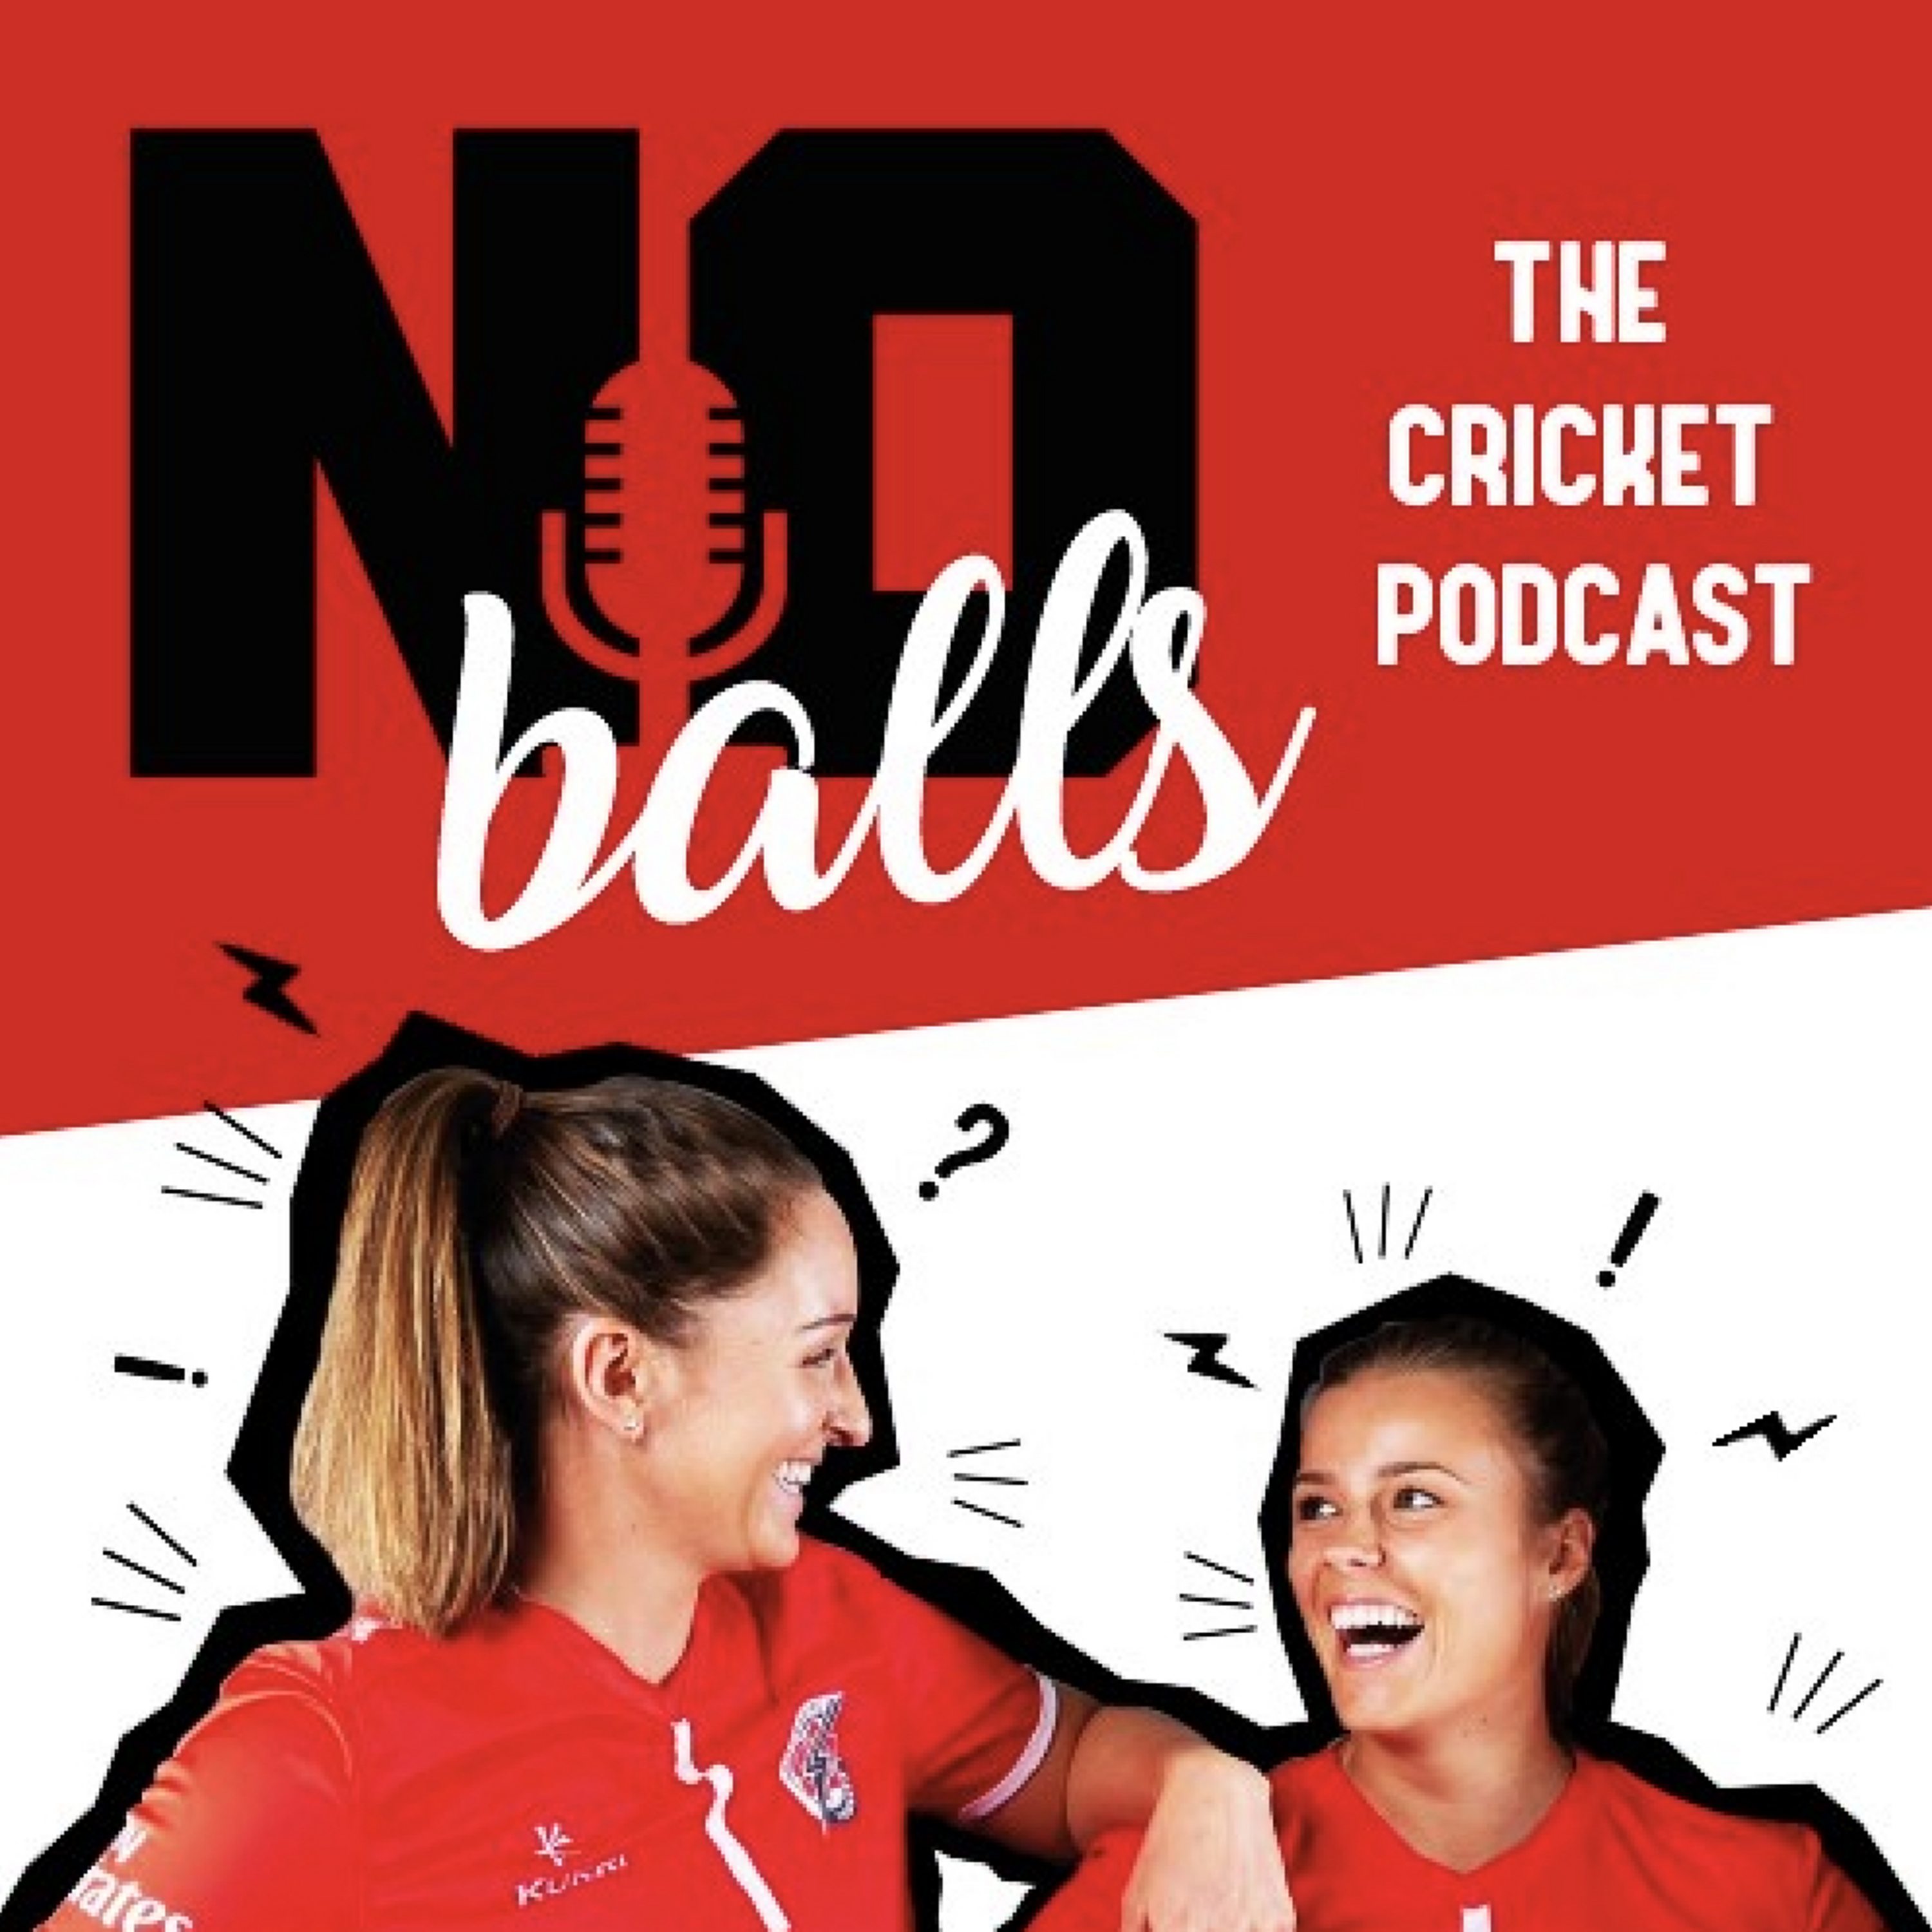 No Balls: The Cricket Podcast - a friend of the podcast shares their amazing story.